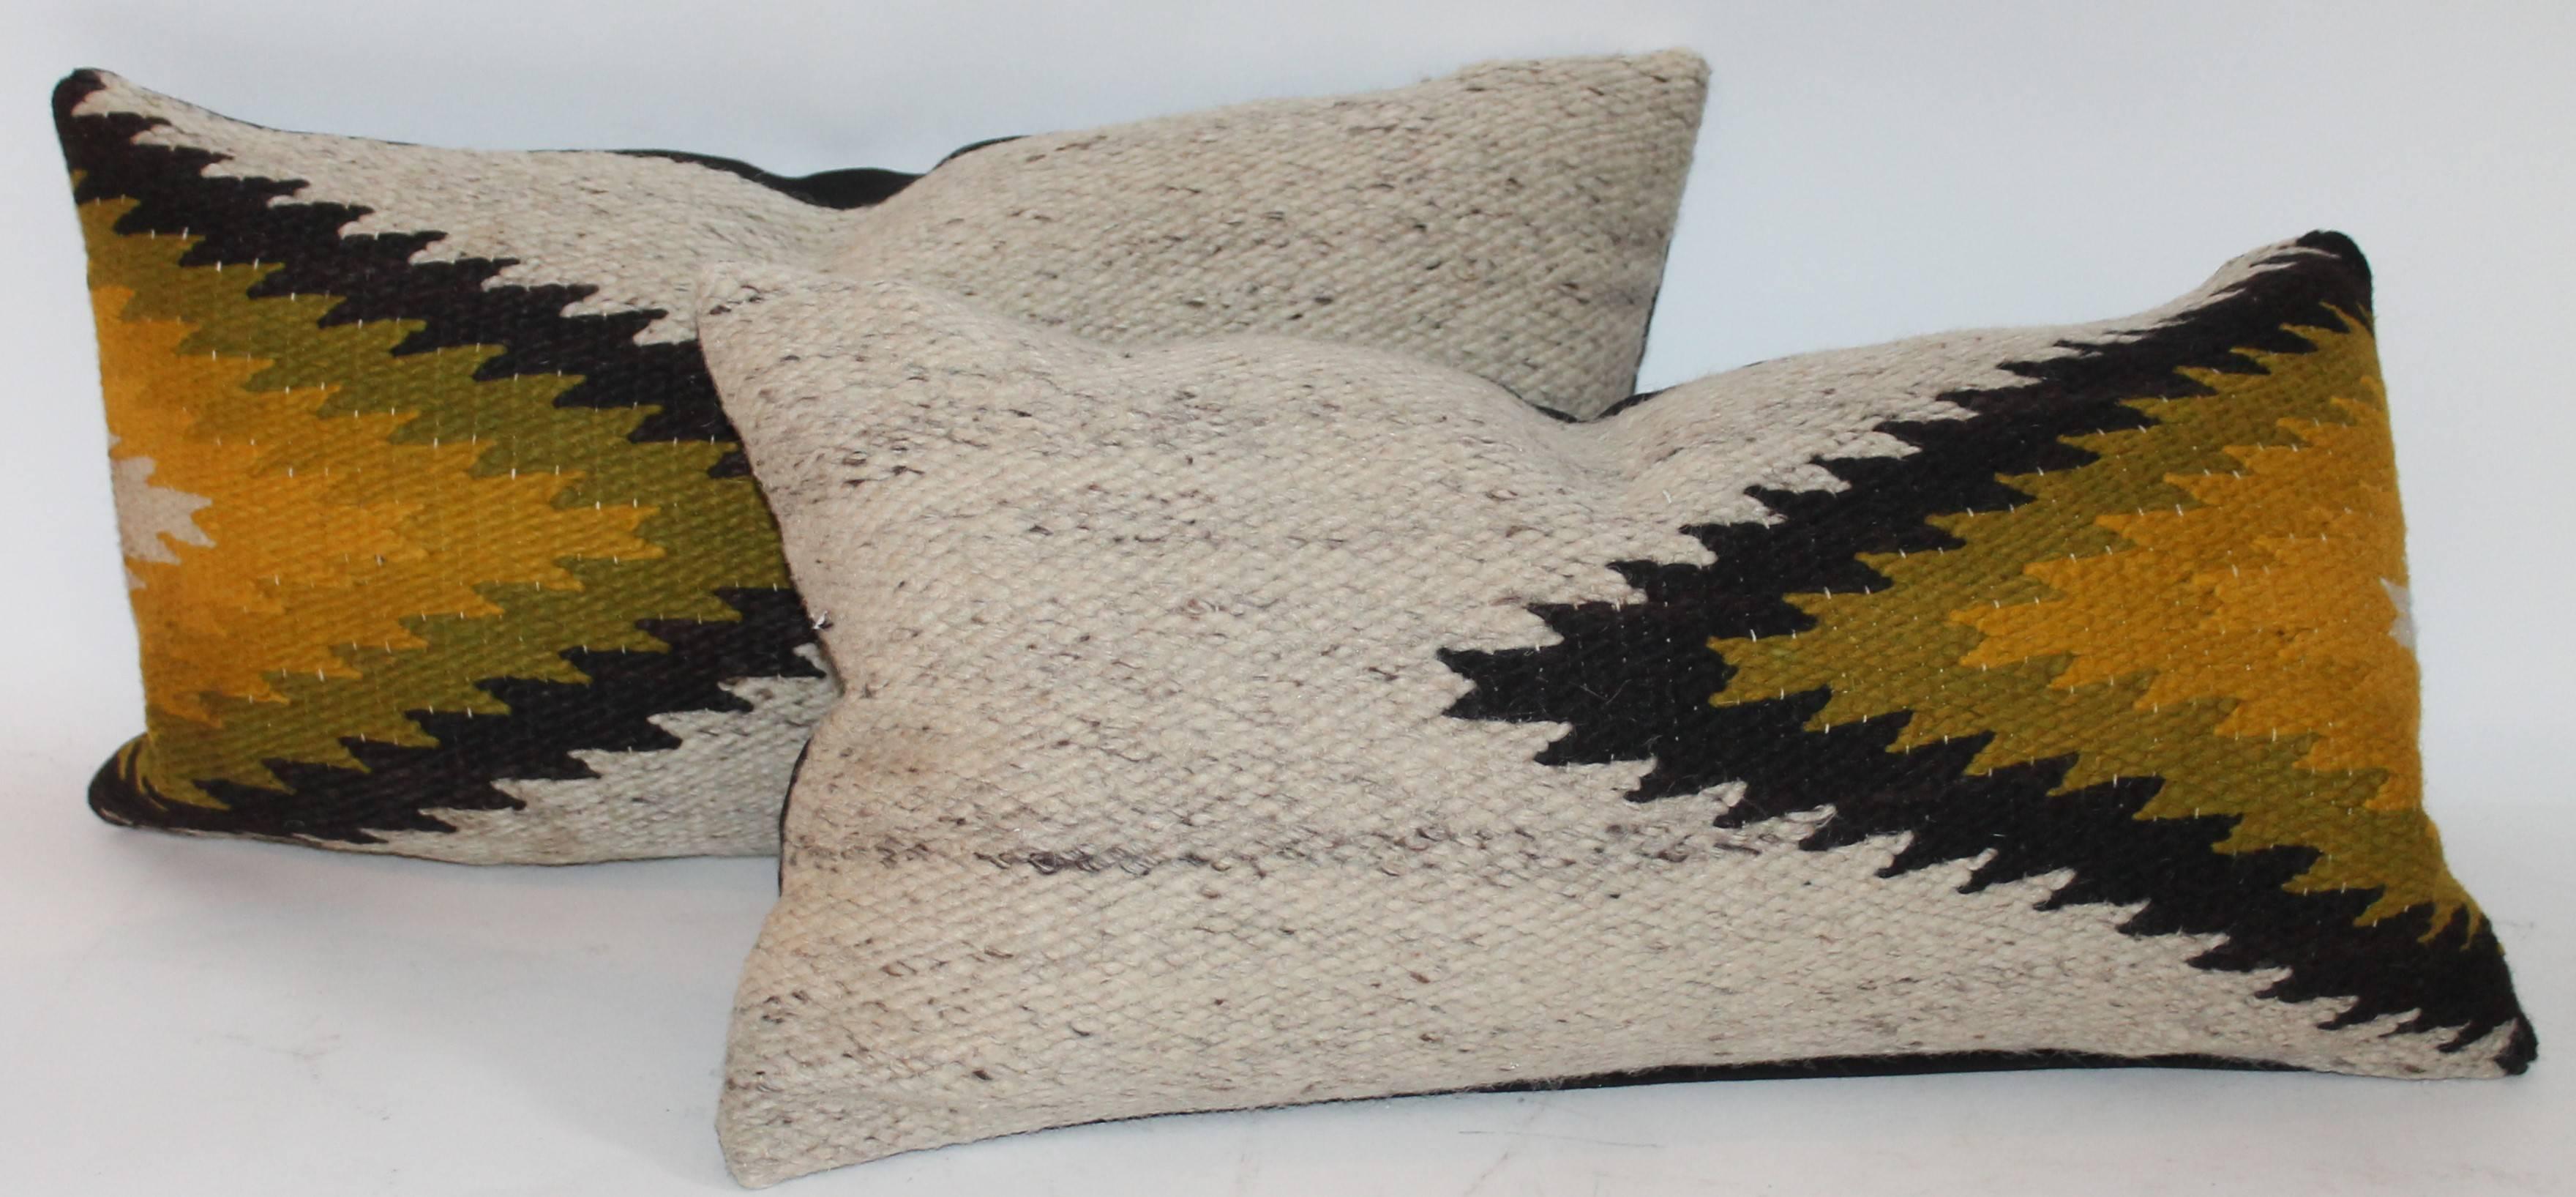 This pair of pillows measure 22 x 14. They are in good condition and have black cotton linen backings.

 